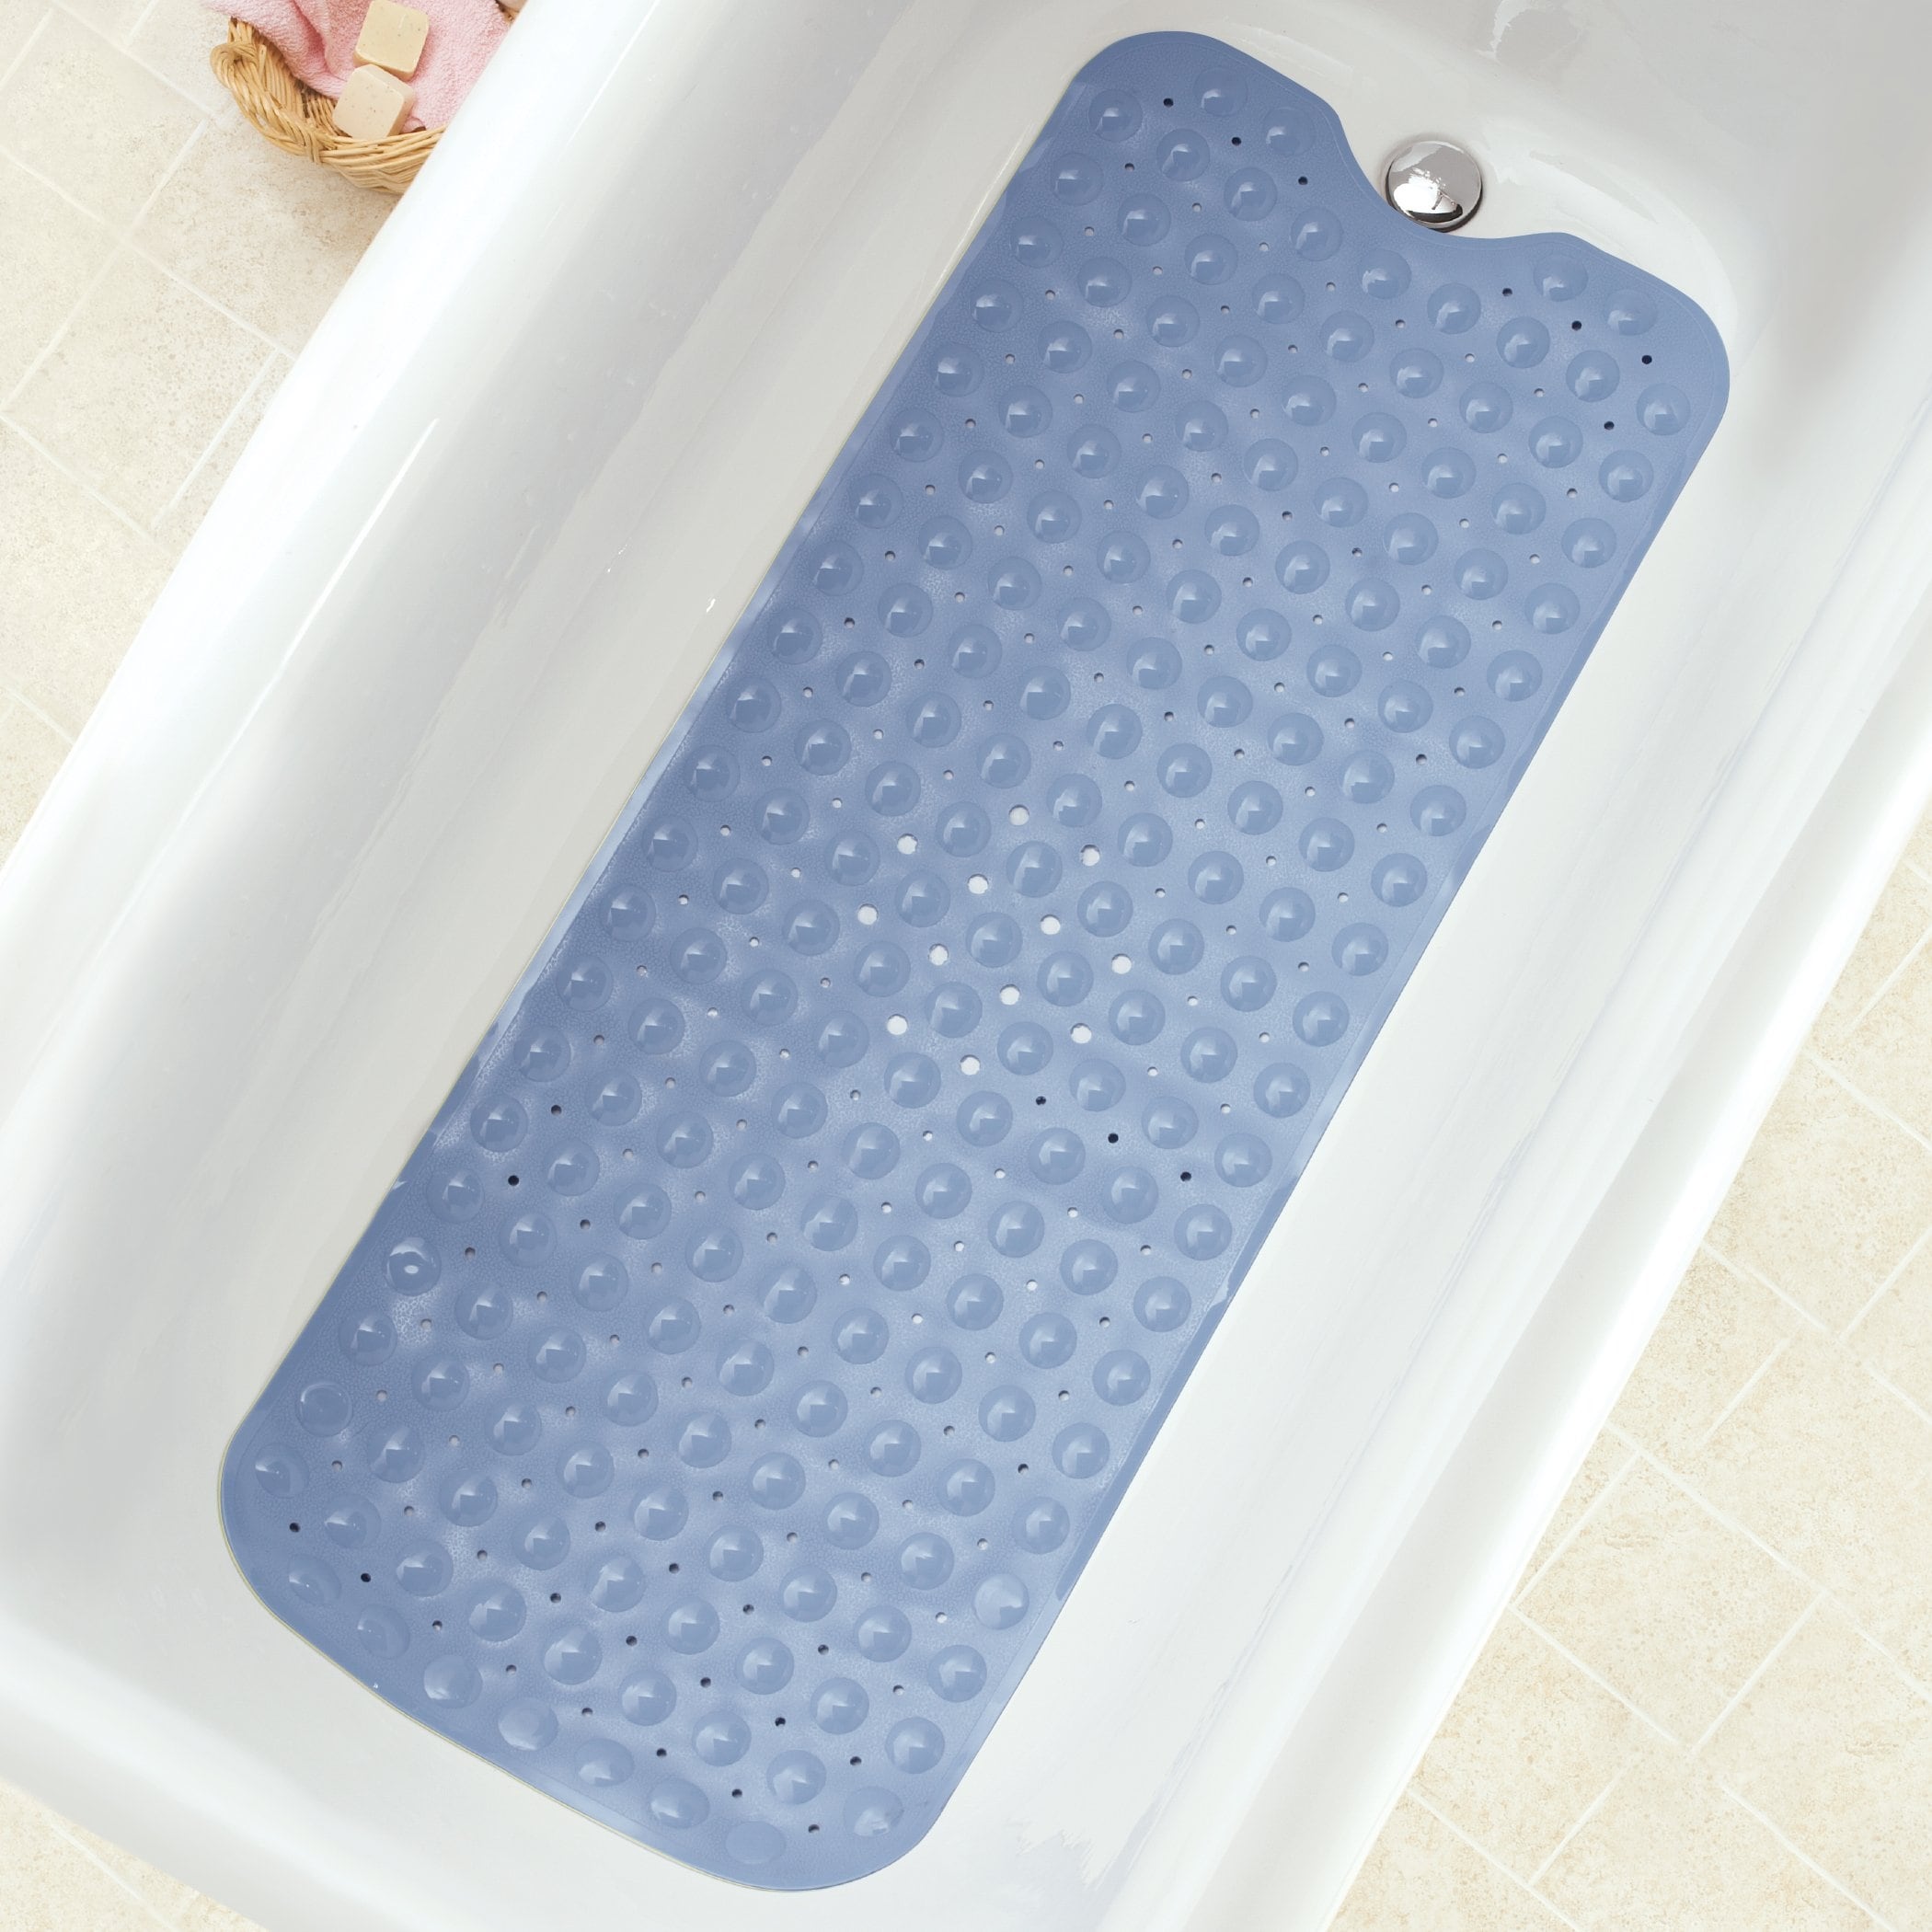 https://ak1.ostkcdn.com/images/products/is/images/direct/c9826a6ba0aaf785641a04462cf2dc30891385ee/Extra-Long-Cushioned-Bathtub-Mat.jpg